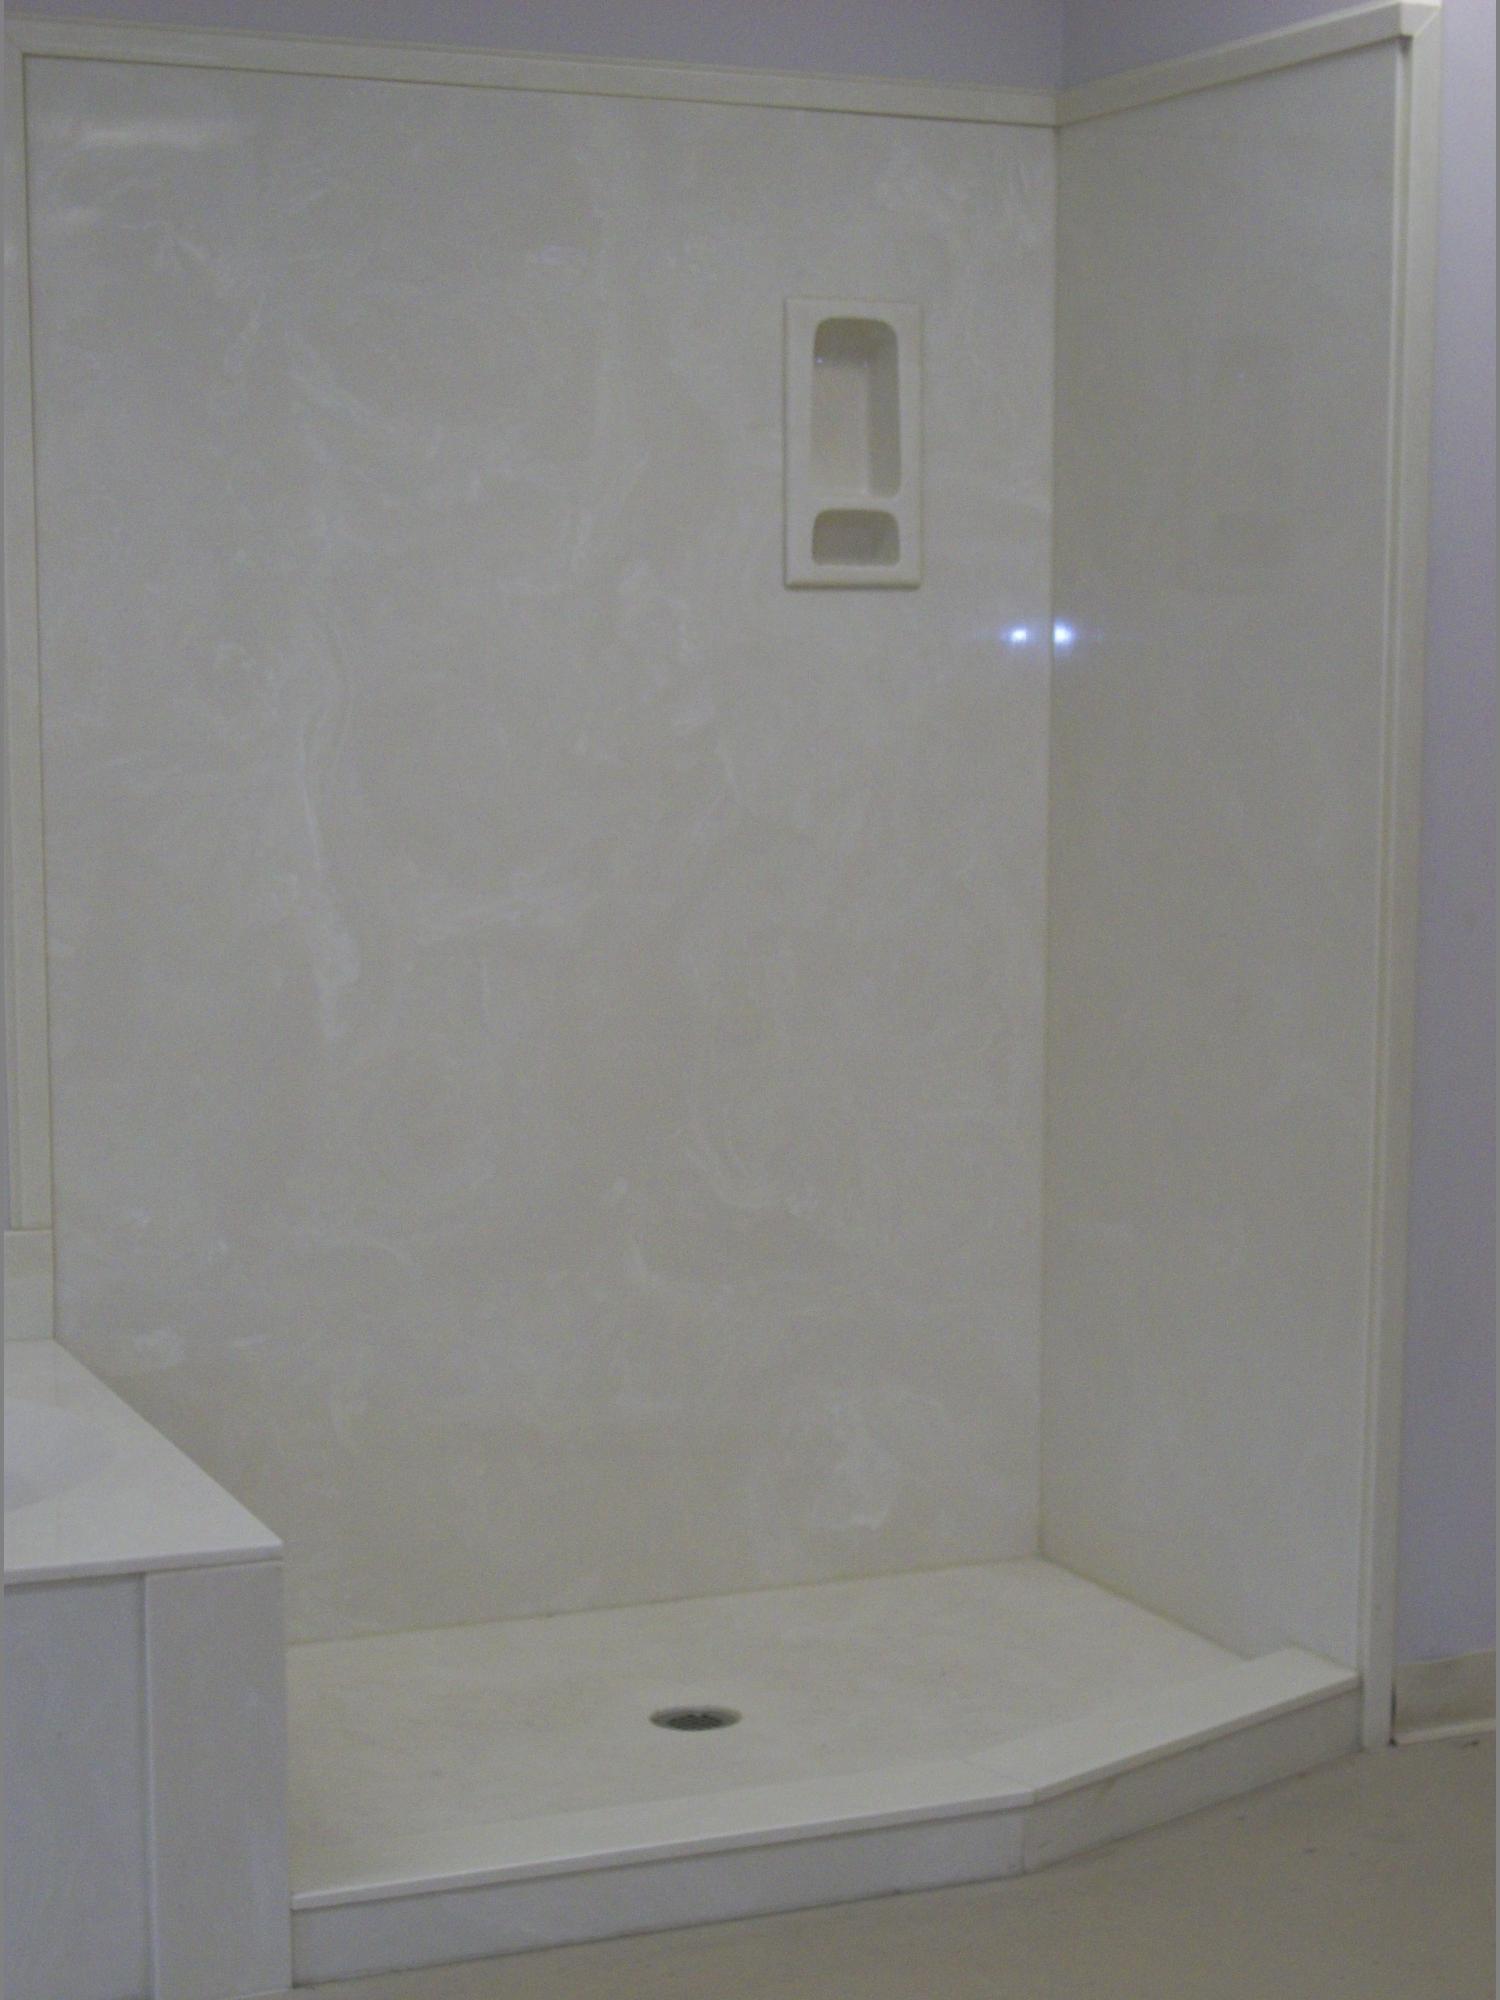 Cultured Marble Showers Tubs Vanity, Cultured Marble Bathtub Surround